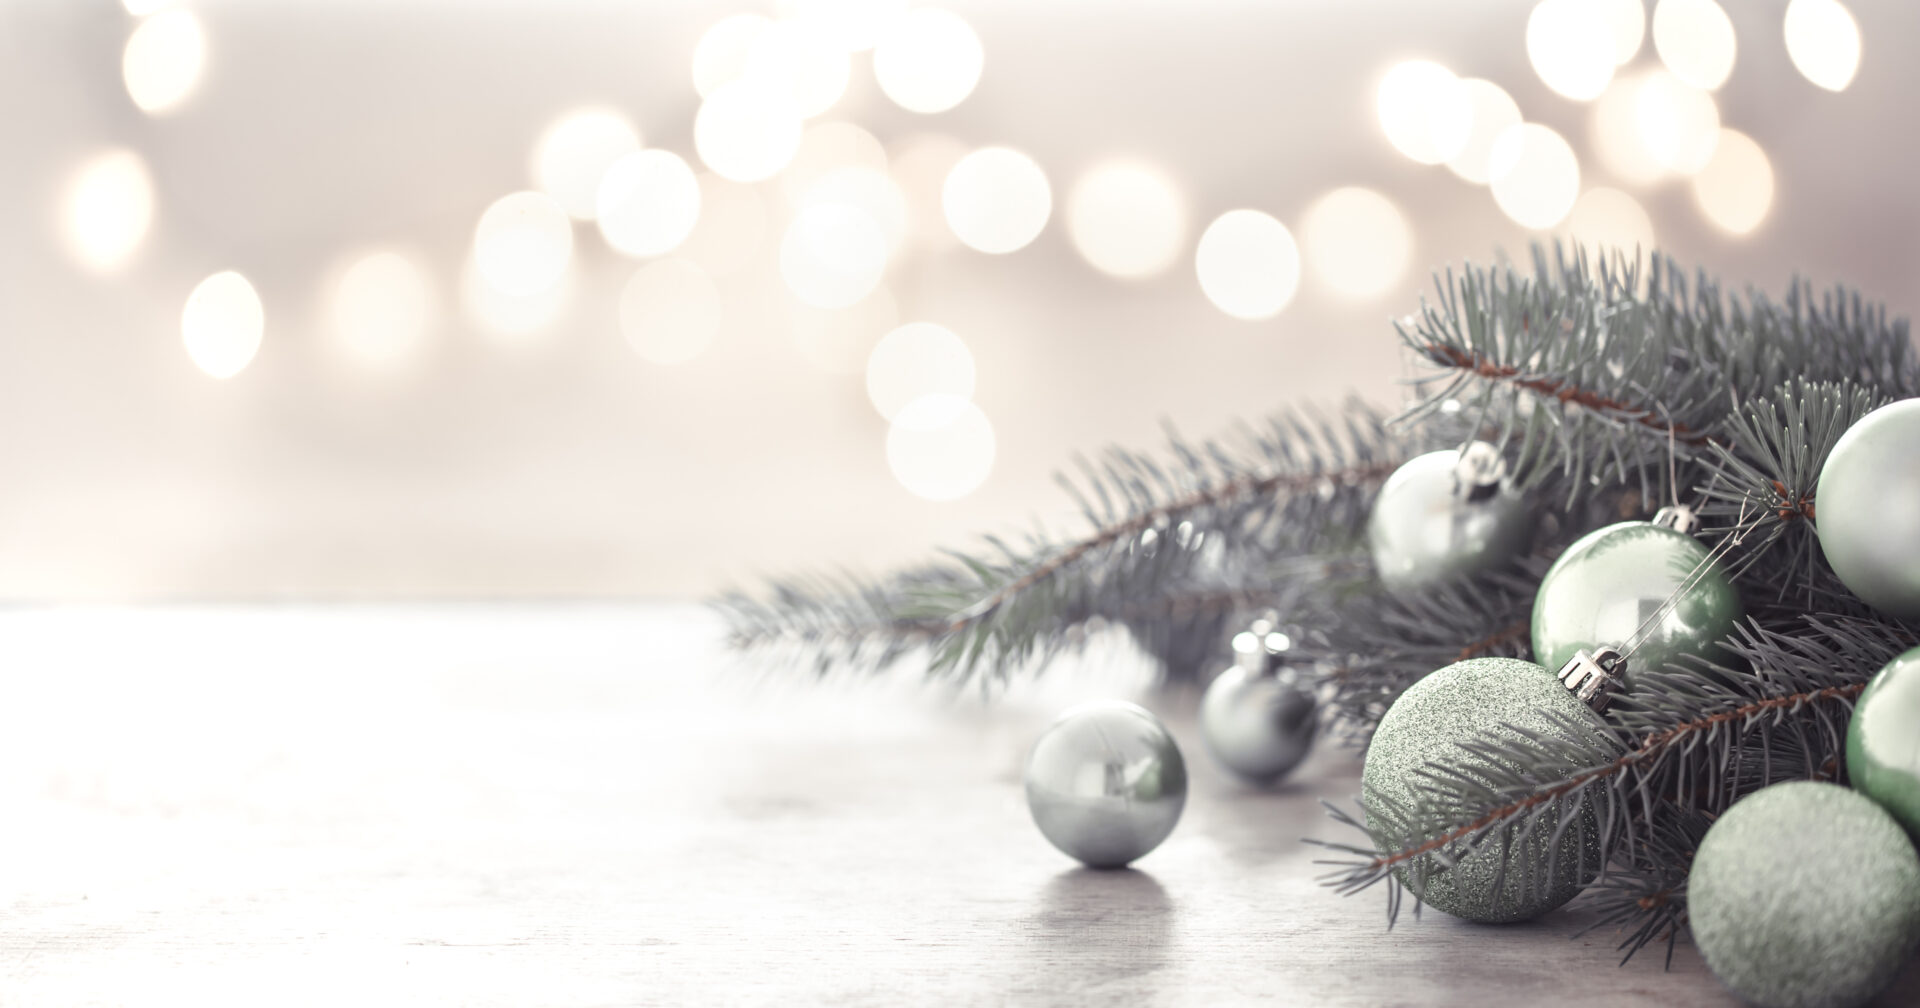 Christmas decorations on a table with a bokeh background.